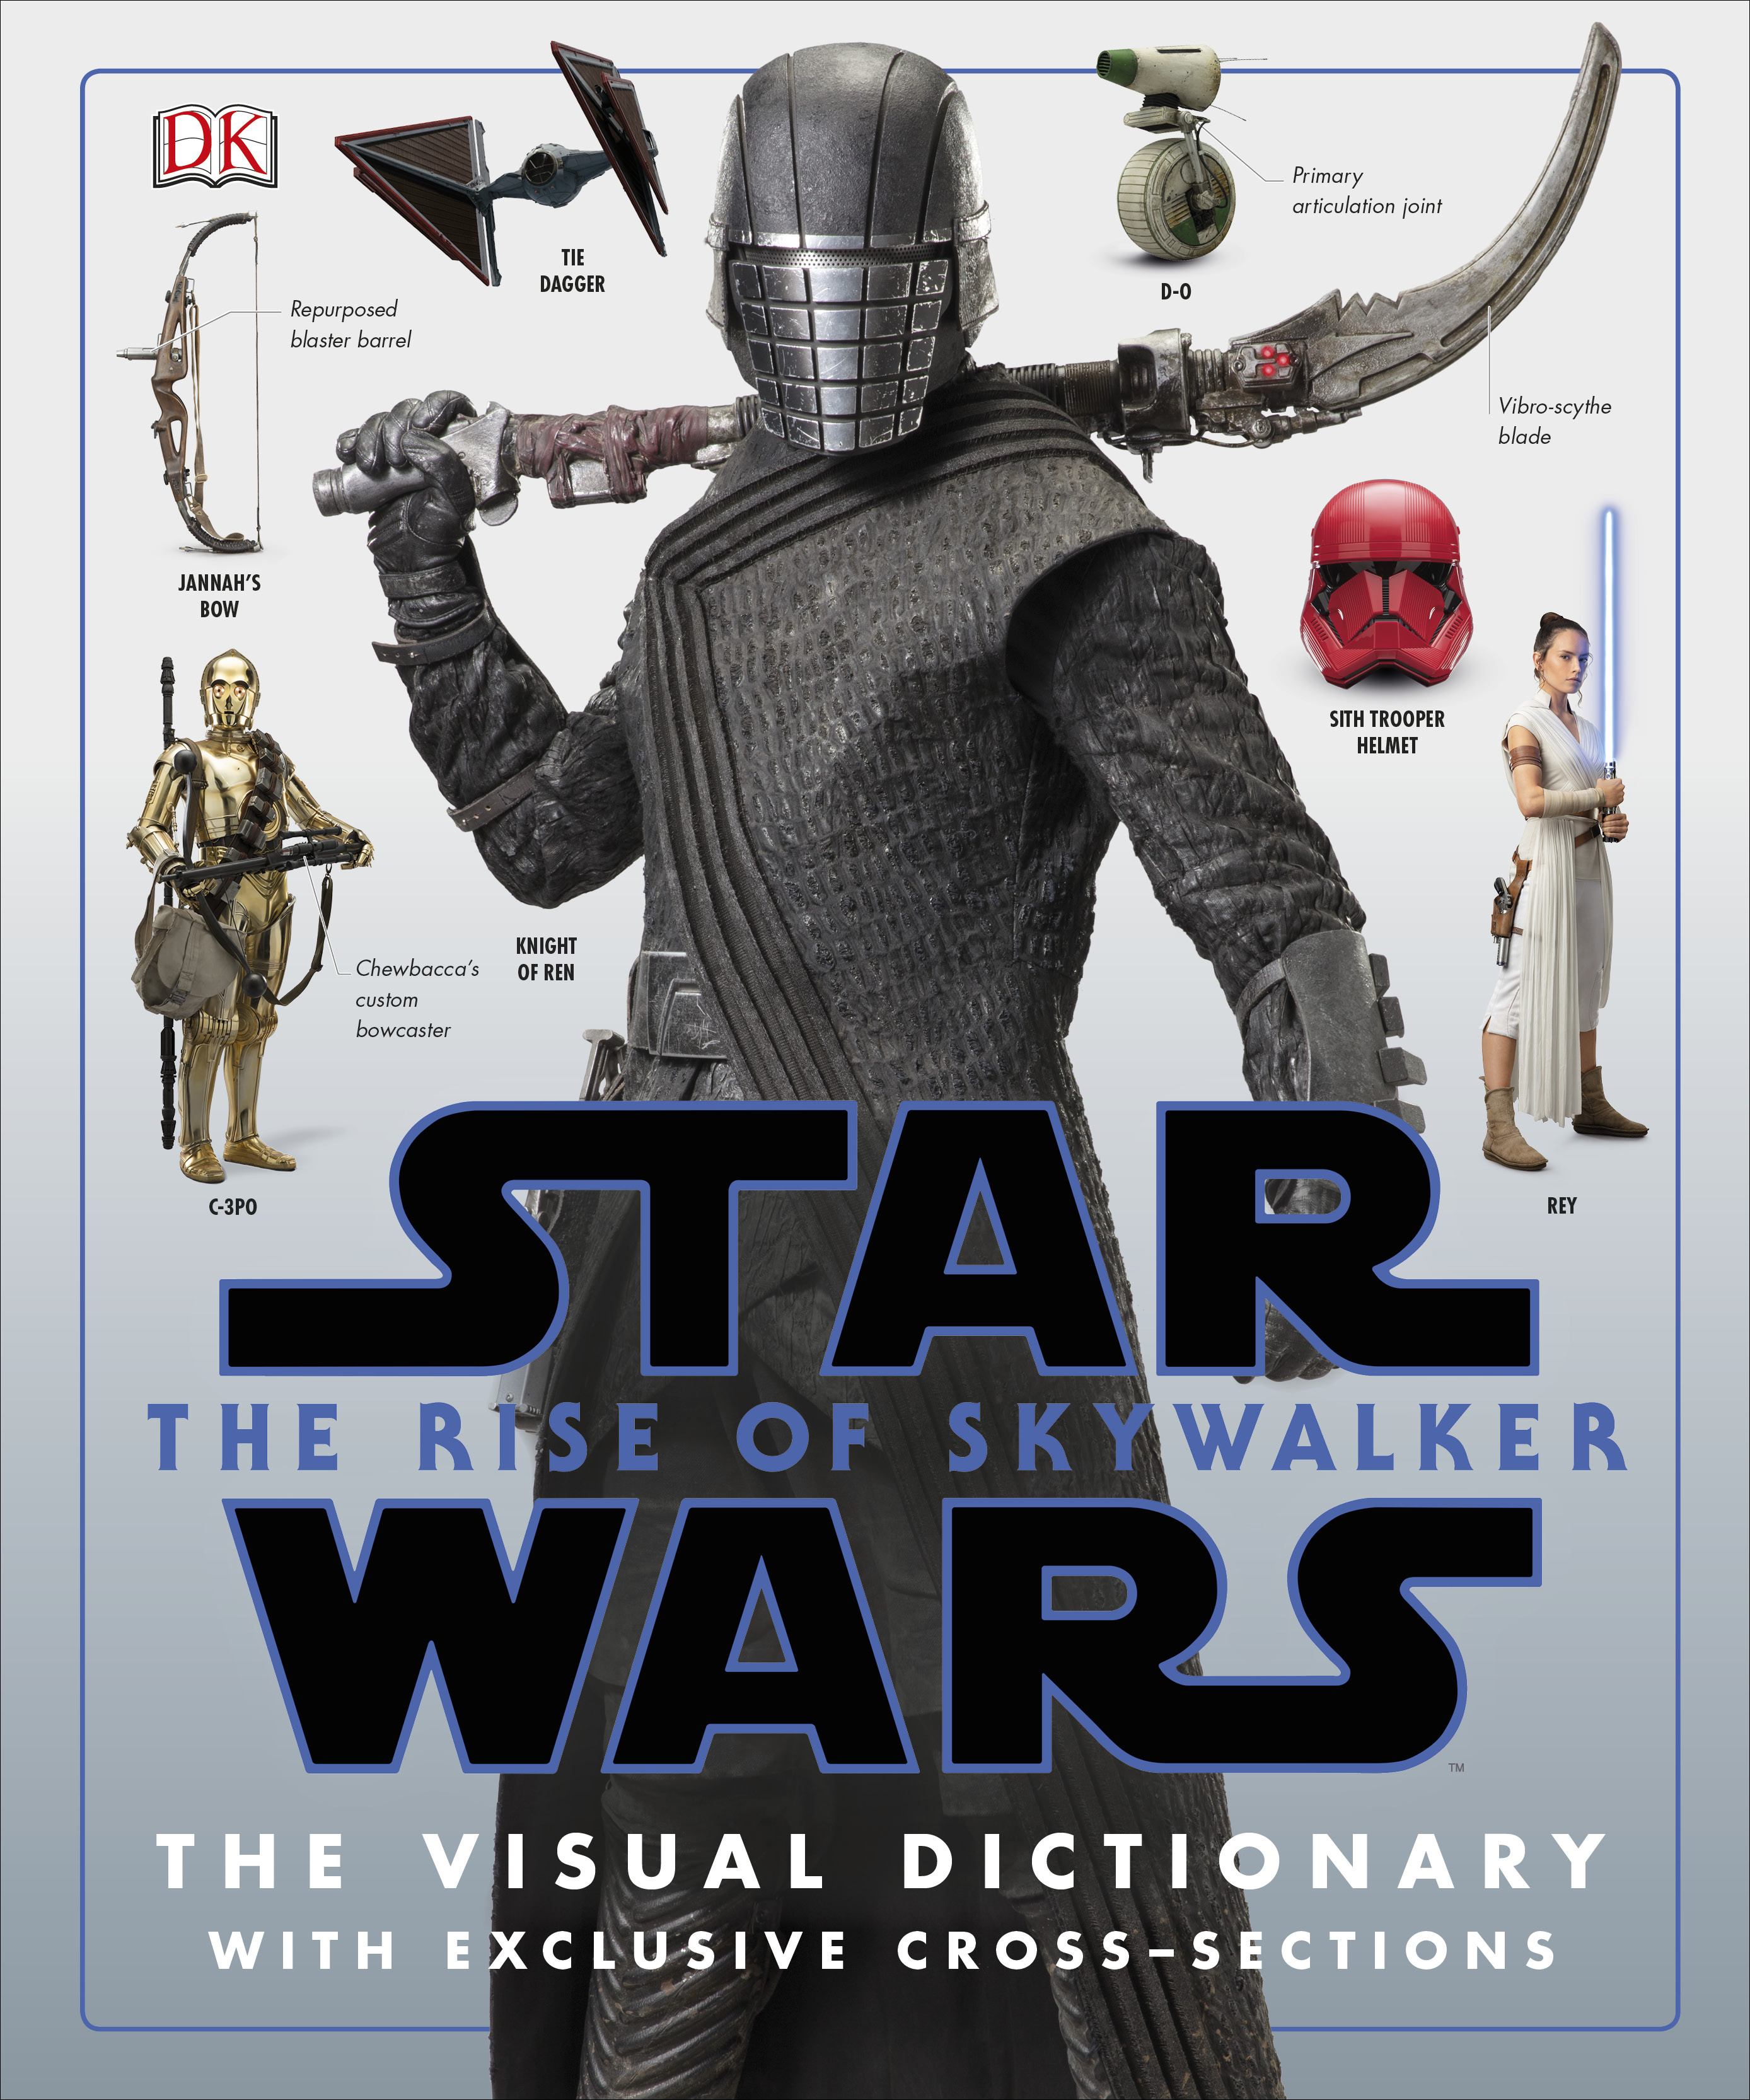 Wookieepedia - The Rise of Skywalker, The Mandalorian, The